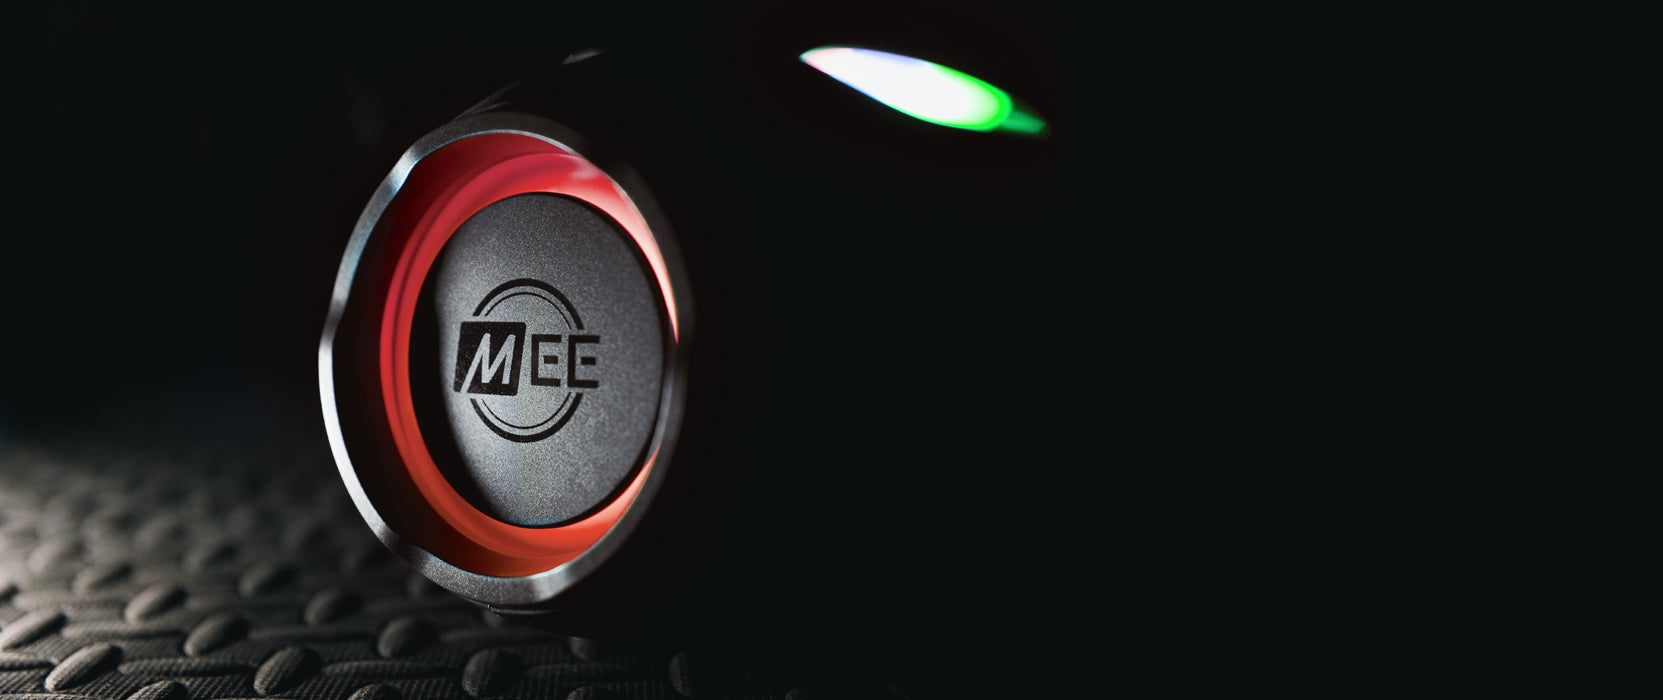 Close-up view of a circular, red push button with "me" logo, illuminated by a soft green light, set against a textured, dark background.